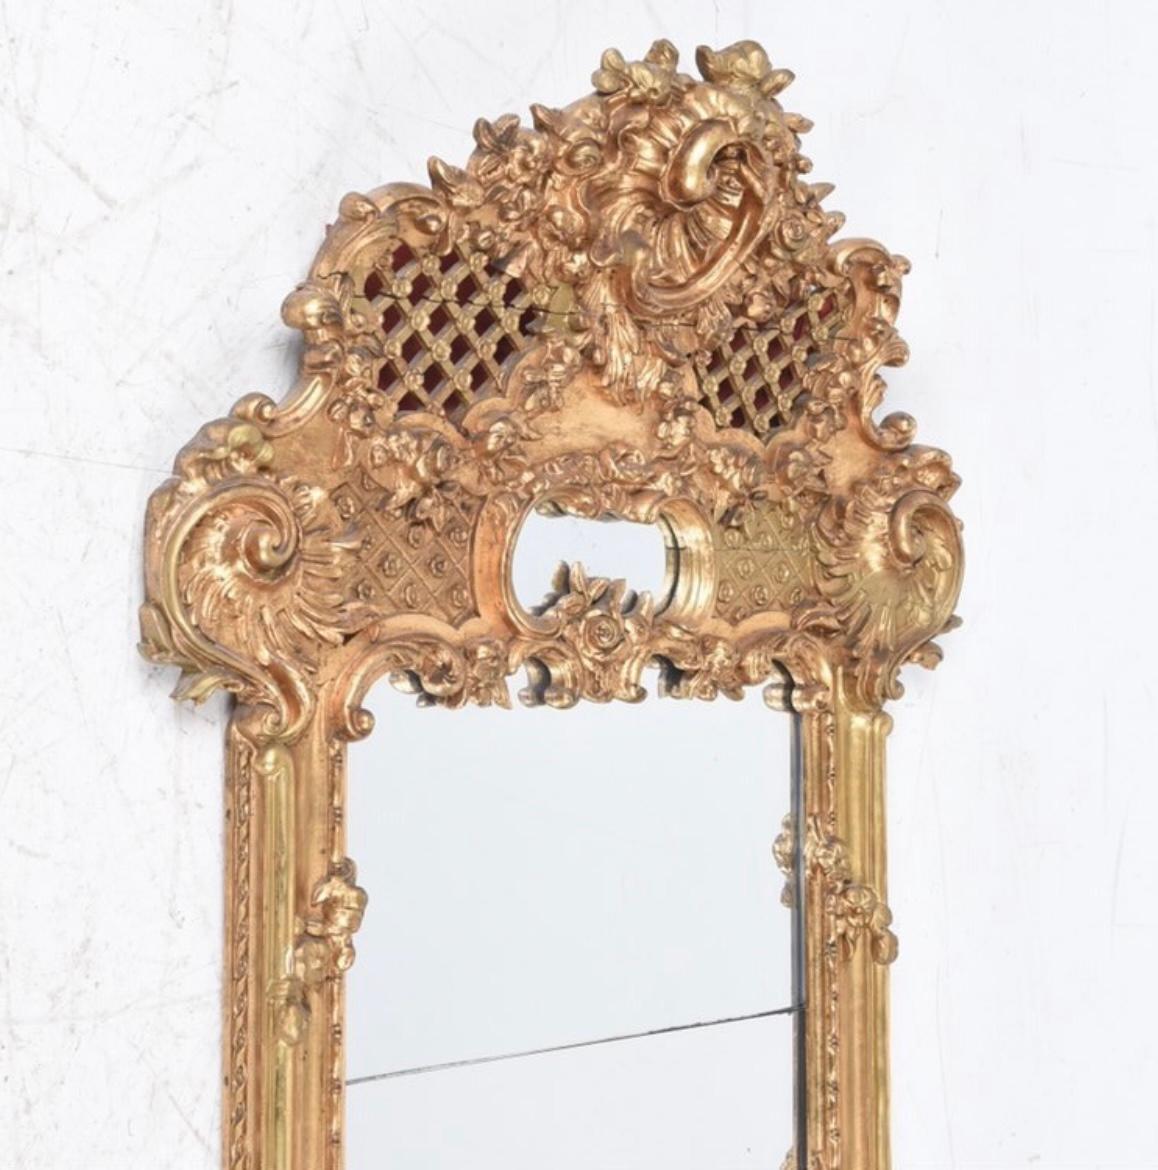 Here is a stunning Baroque Swedish giltwood mirror with split mirror glass in great condition. This piece is truly special and is circa 1870-1879. Perfect for an entry way, above a commode, alone by itself in a hallway, etc. The options are endless